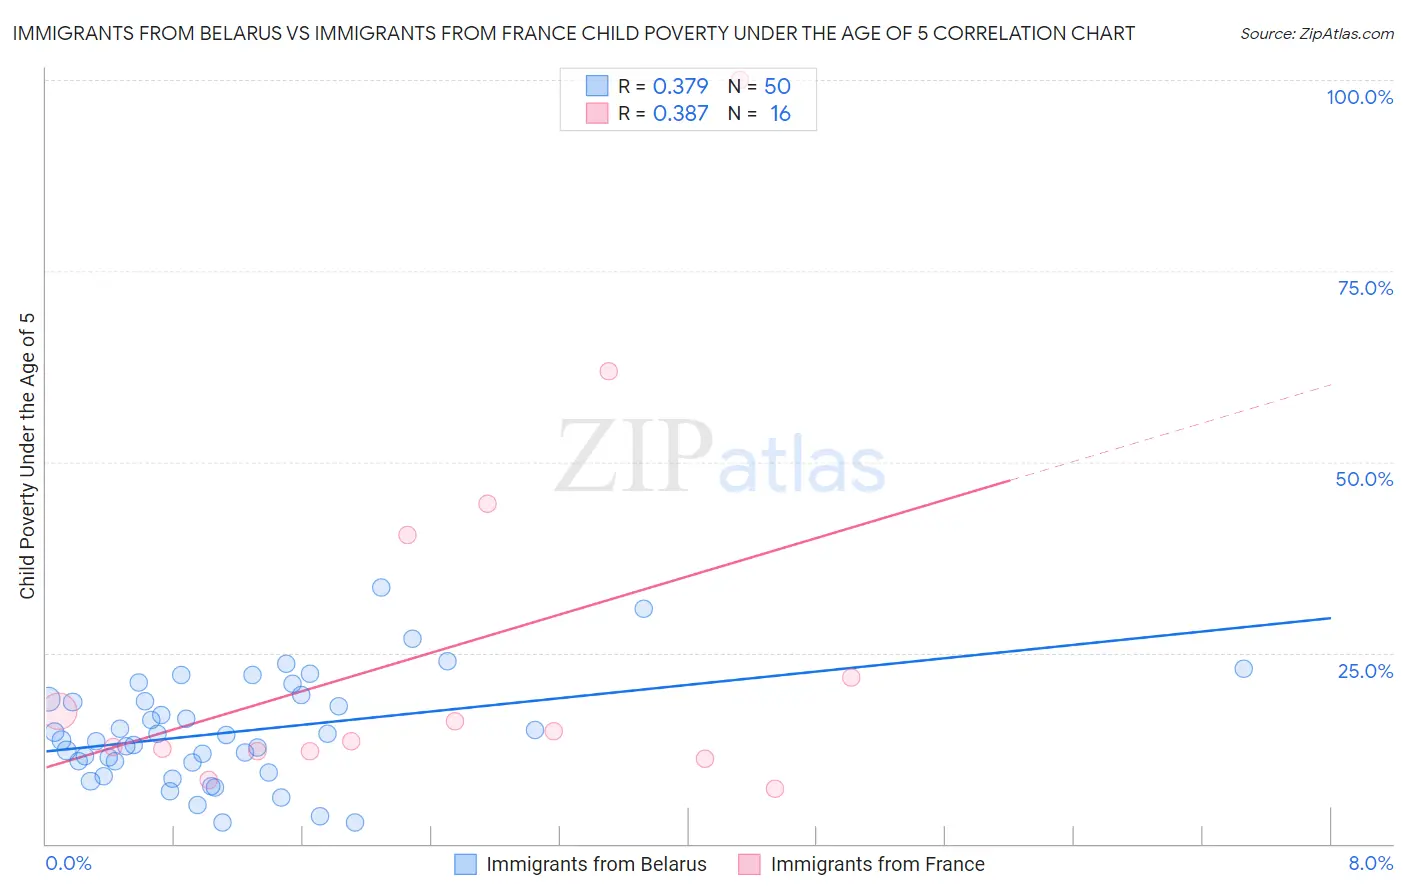 Immigrants from Belarus vs Immigrants from France Child Poverty Under the Age of 5